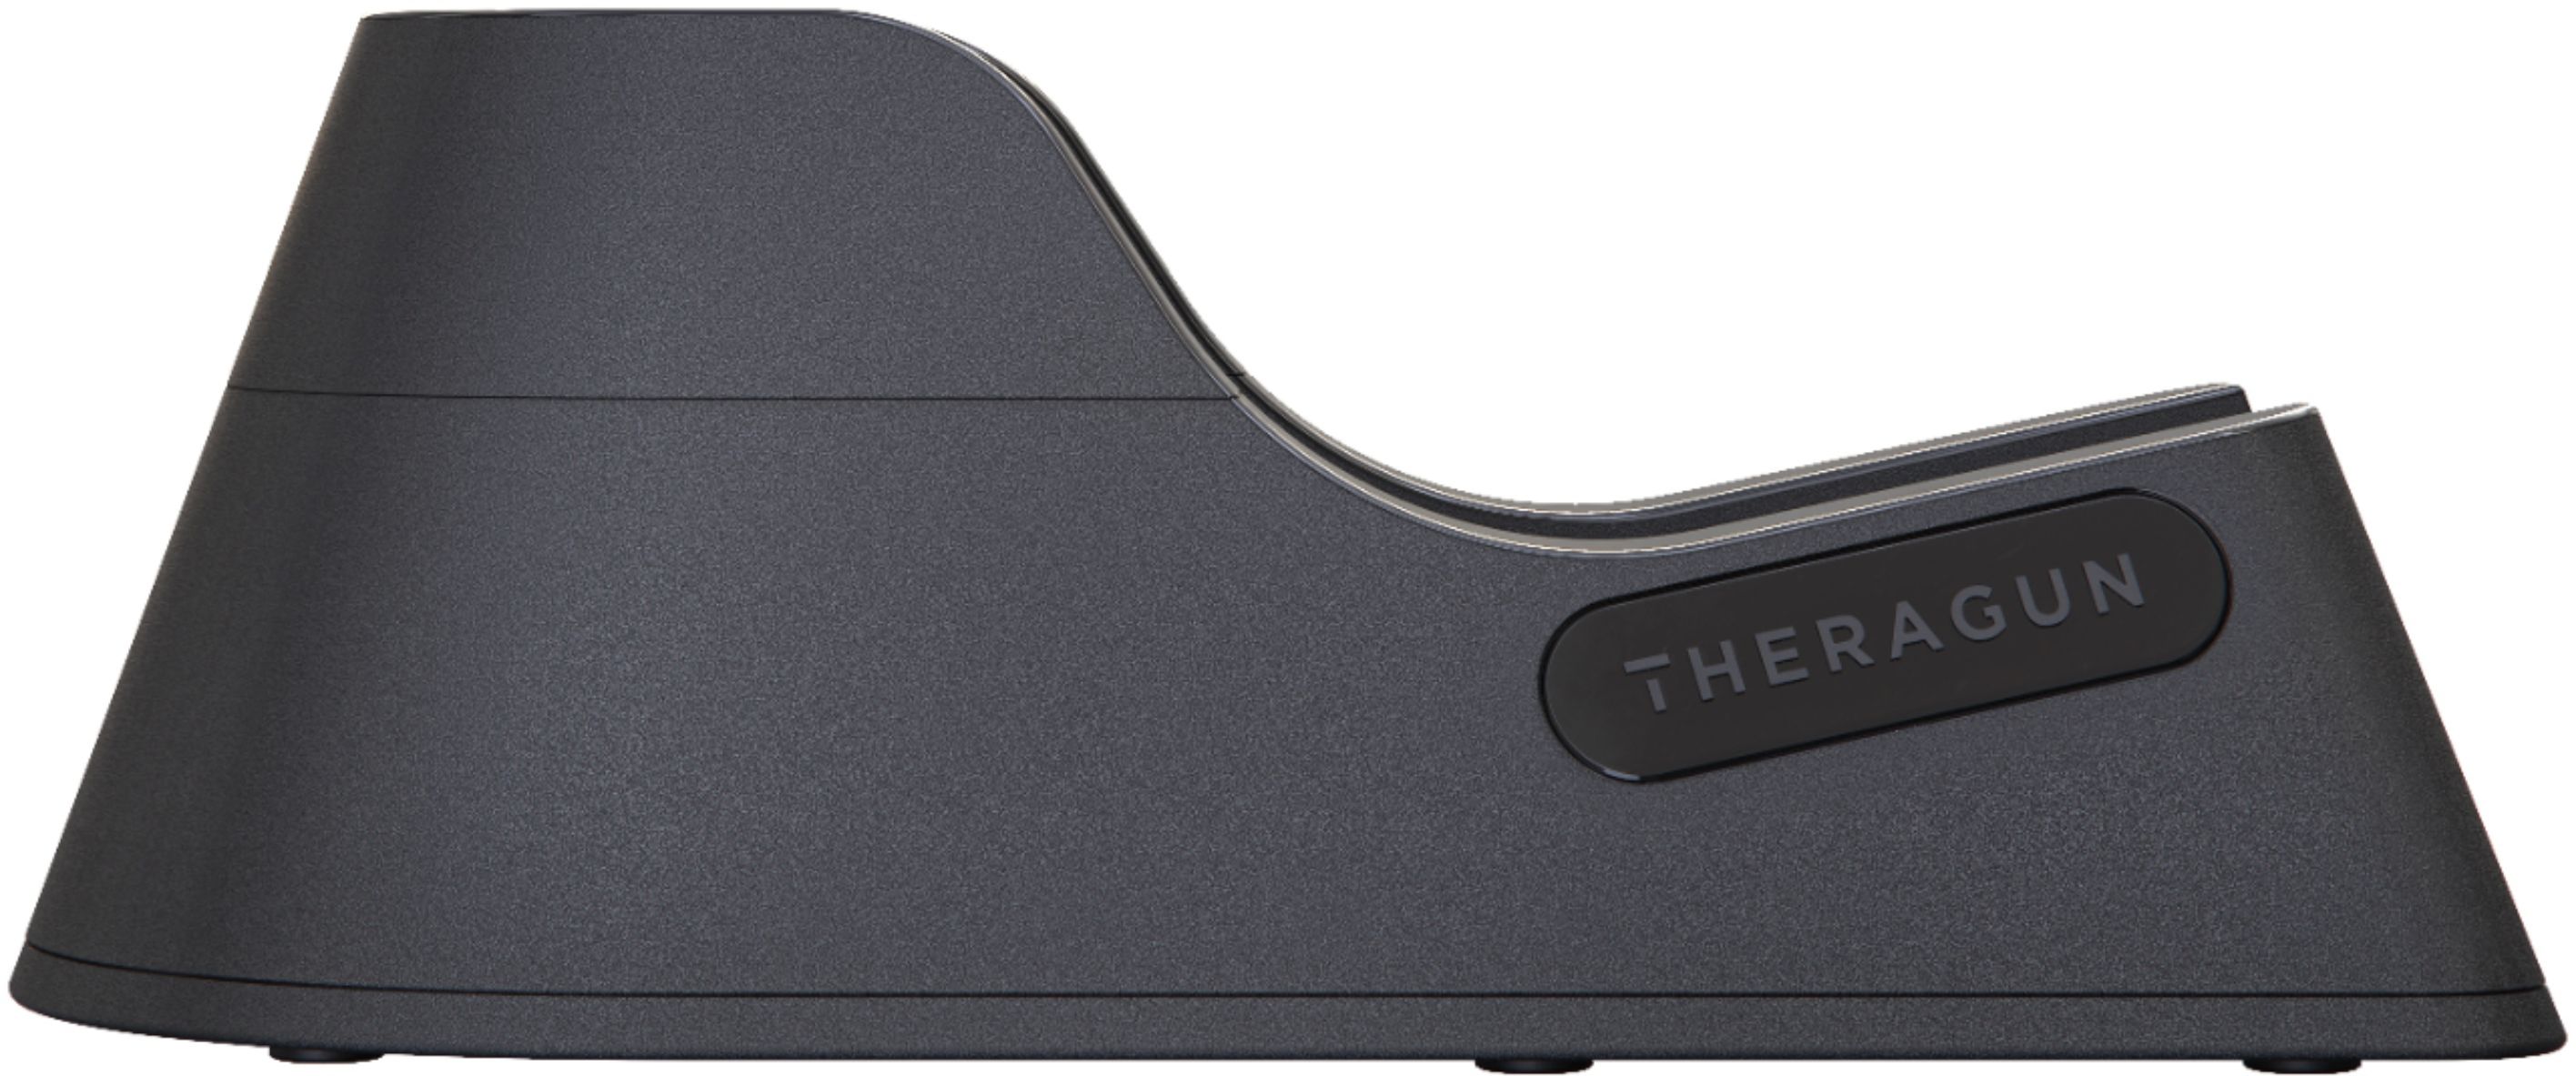 Charging Stand for Theragun liv Massager - Black was $79.0 now $49.0 (38.0% off)